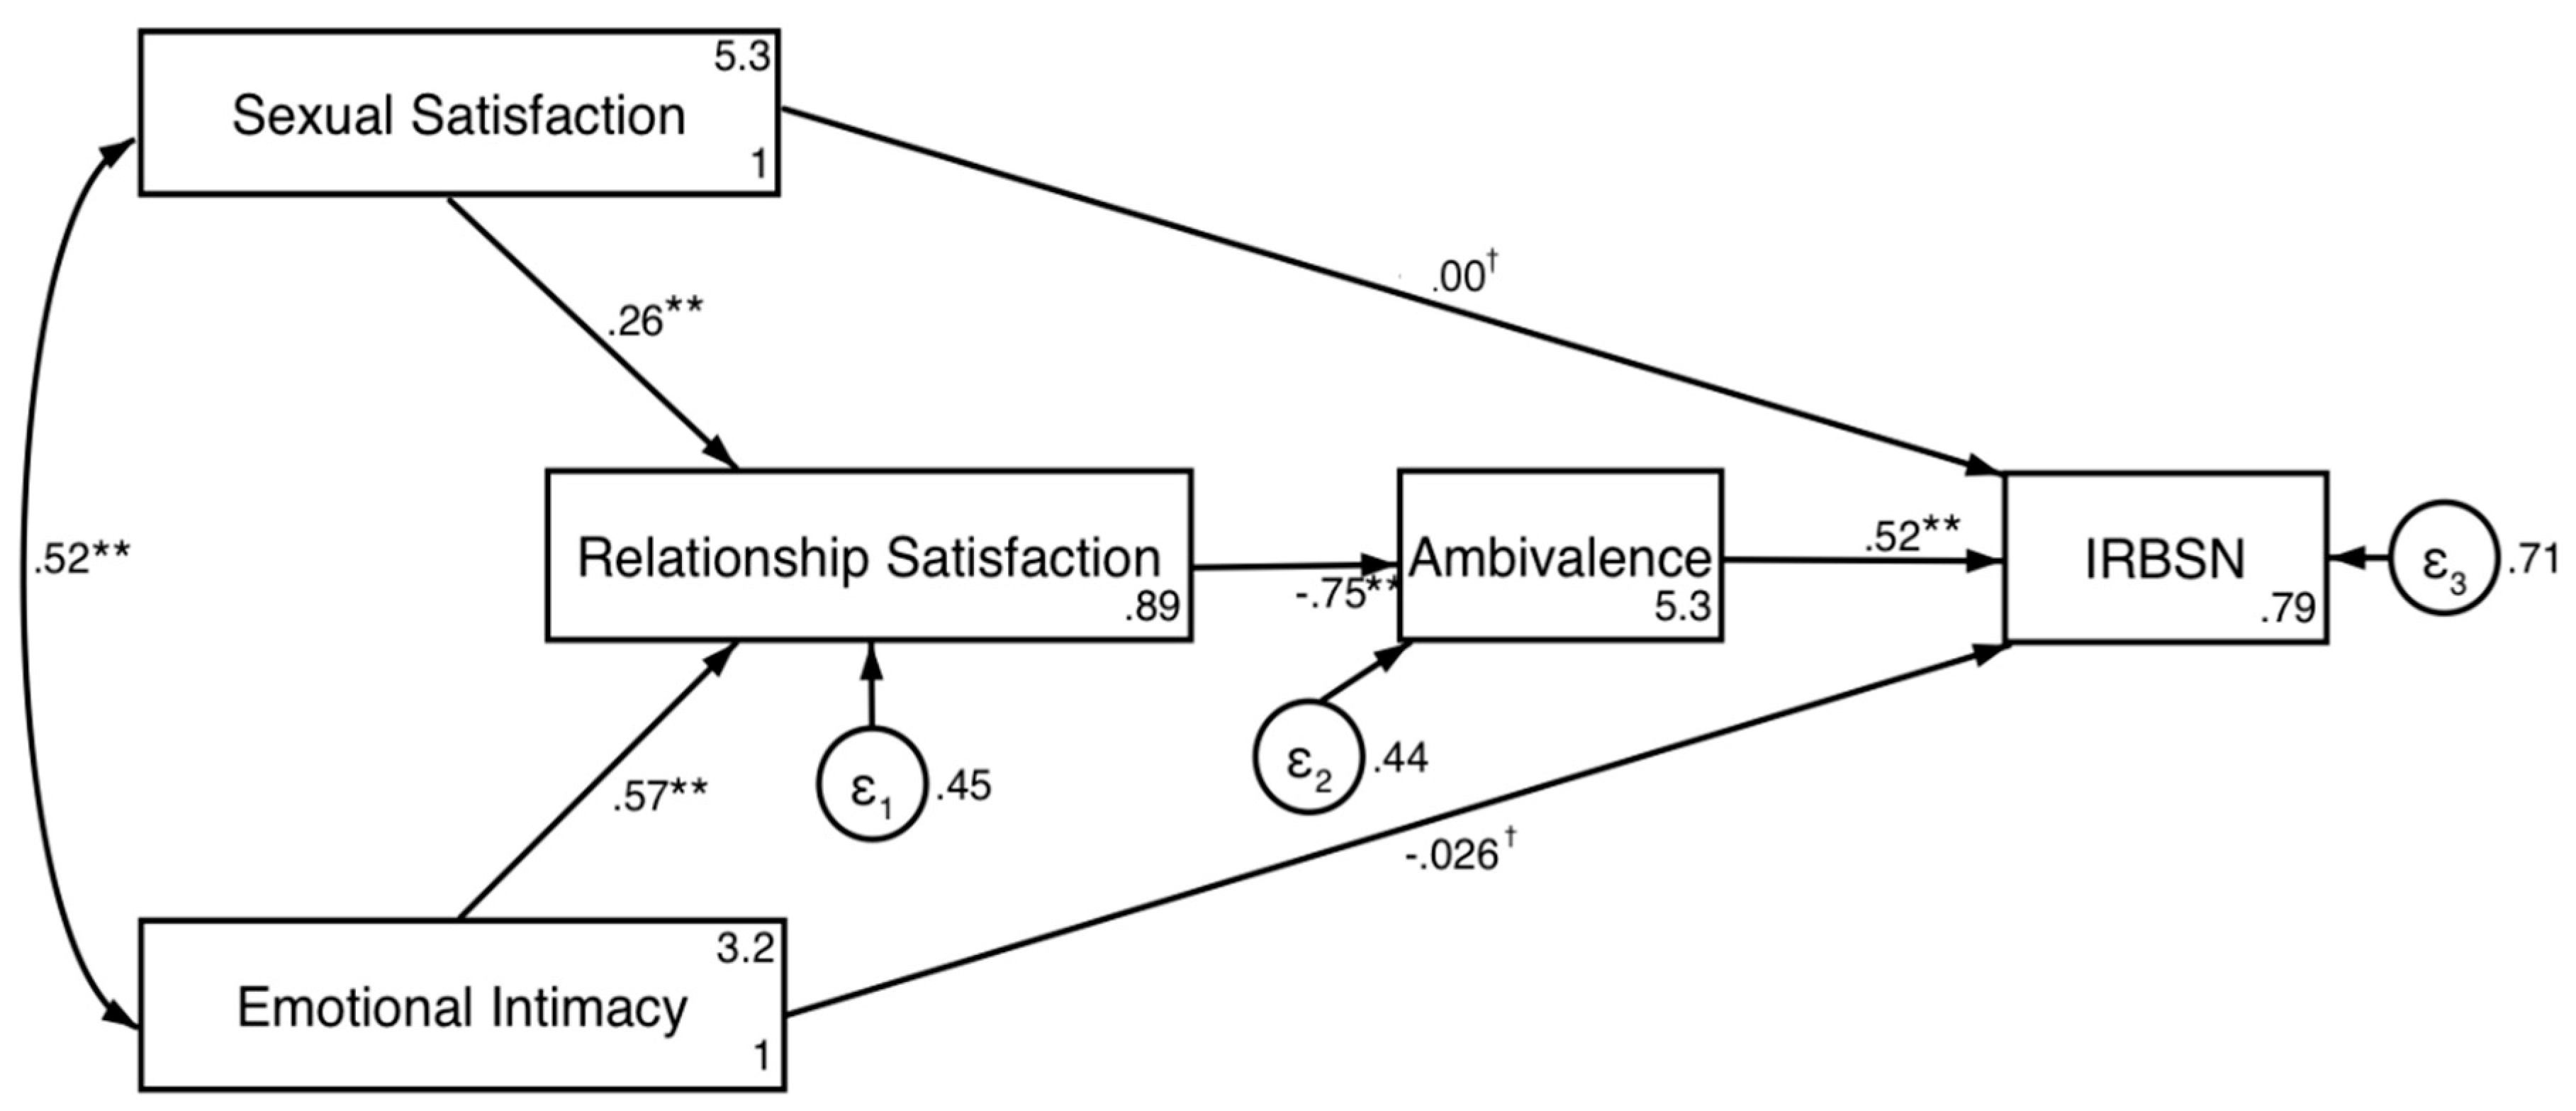 EJIHPE Free Full-Text Relationship Satisfaction and Infidelity-Related Behaviors on Social Networks A Preliminary Online Study of Hispanic Women